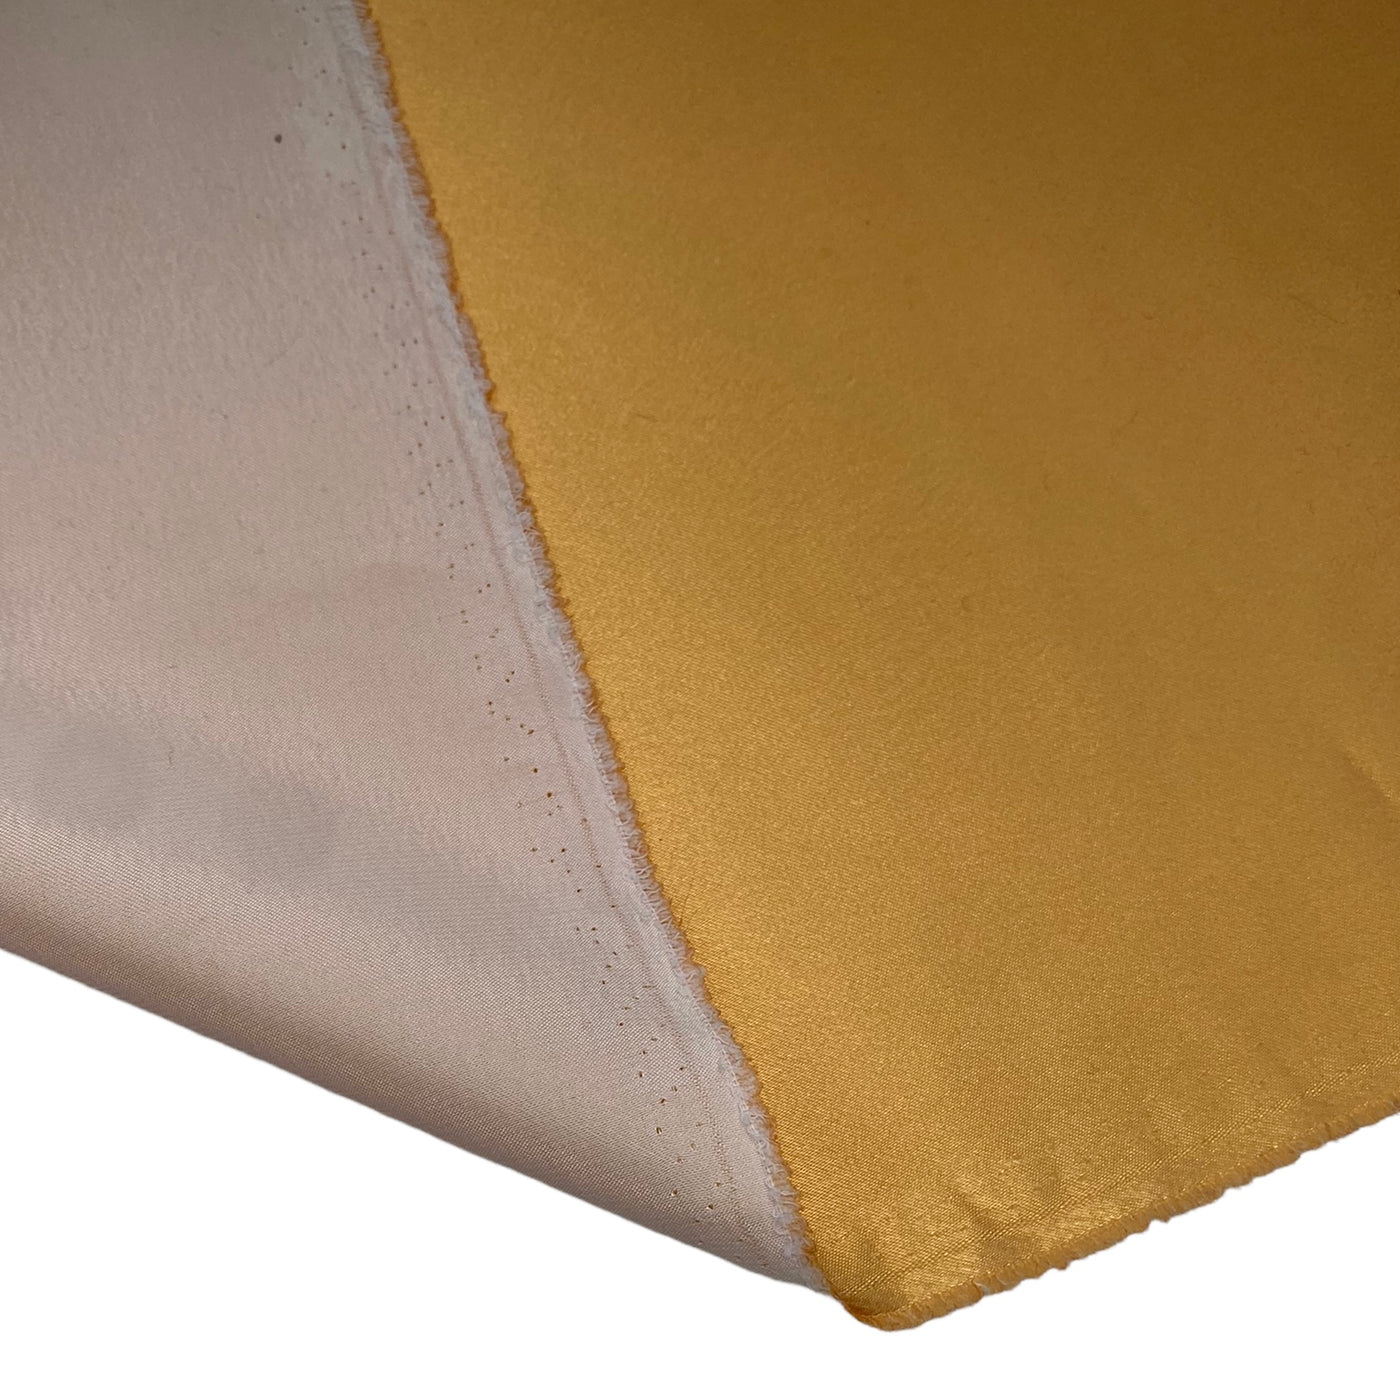 Polyester Charmeuse - 58” - Gold